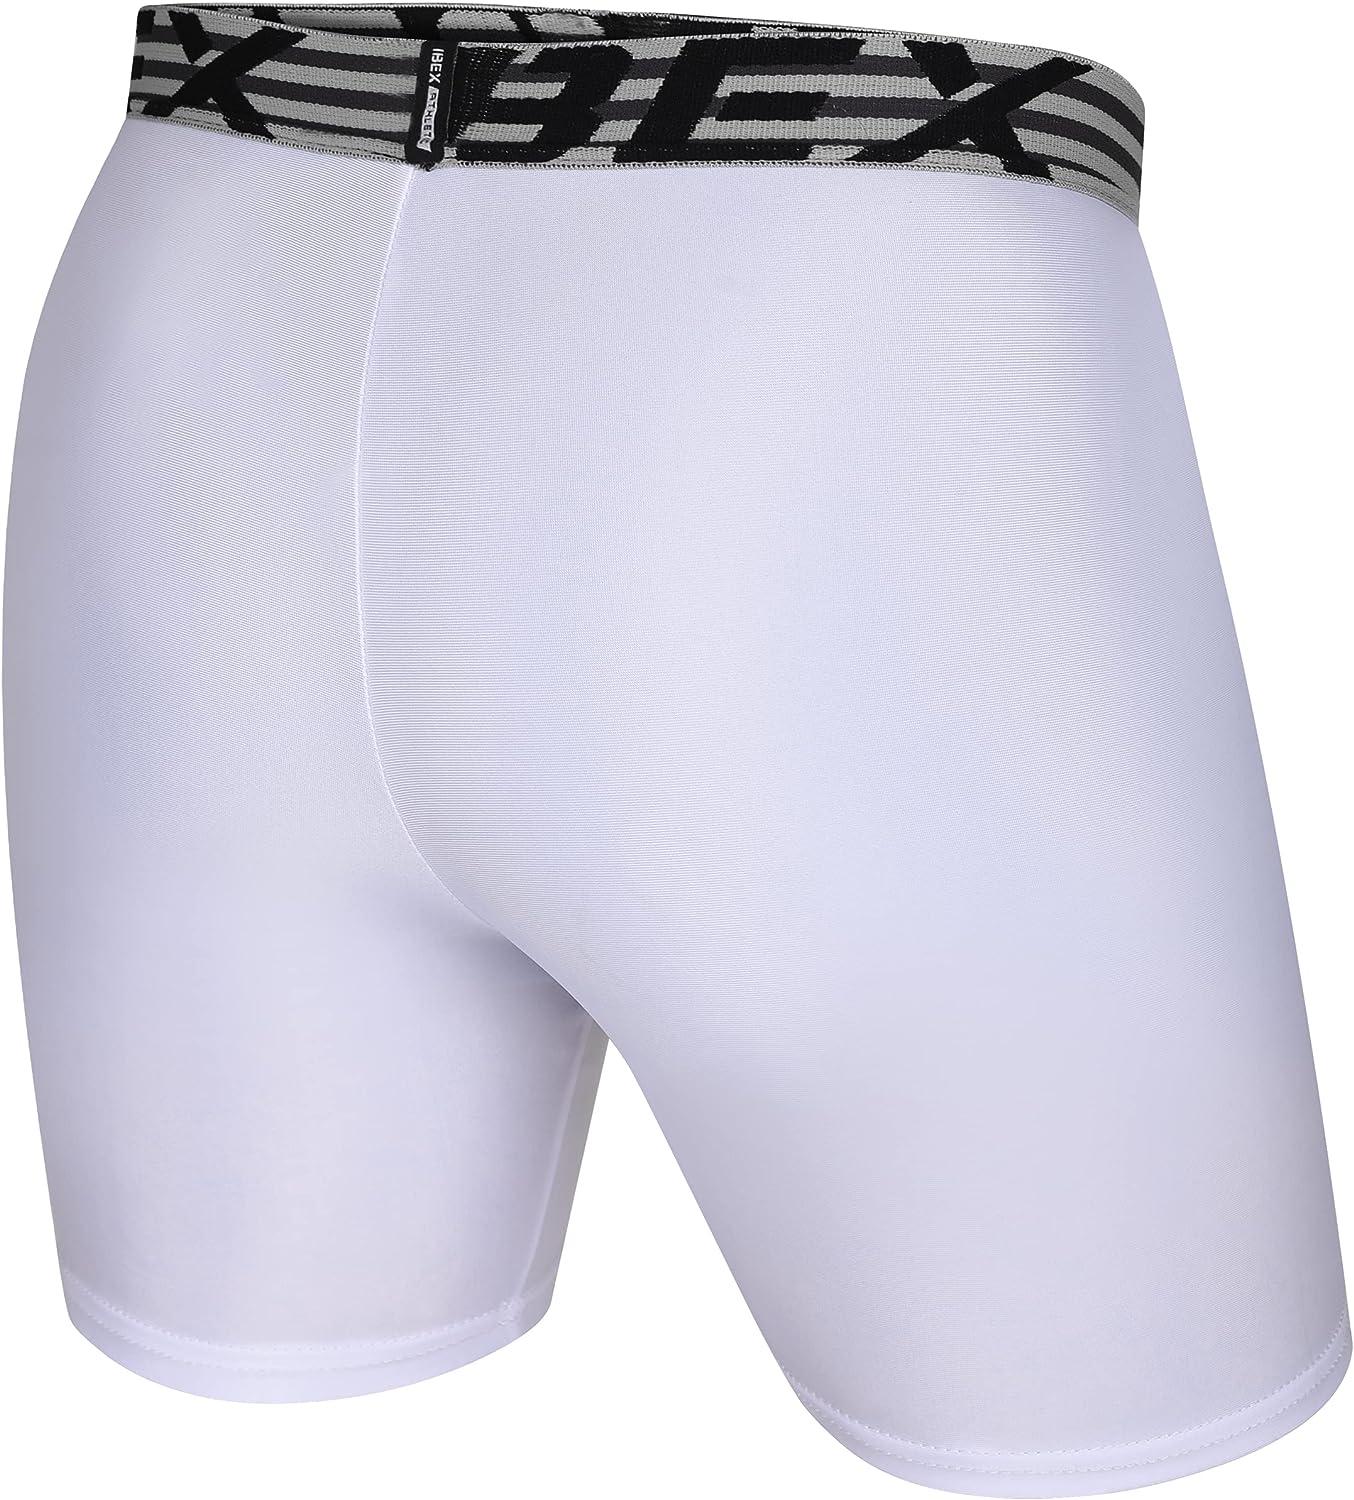 IBEX ATHLETIC Youth Compression Shorts with Protective Cup - Youth Cup  Underwear with Cup, Boys Compression Shorts - (Youth) X-Large